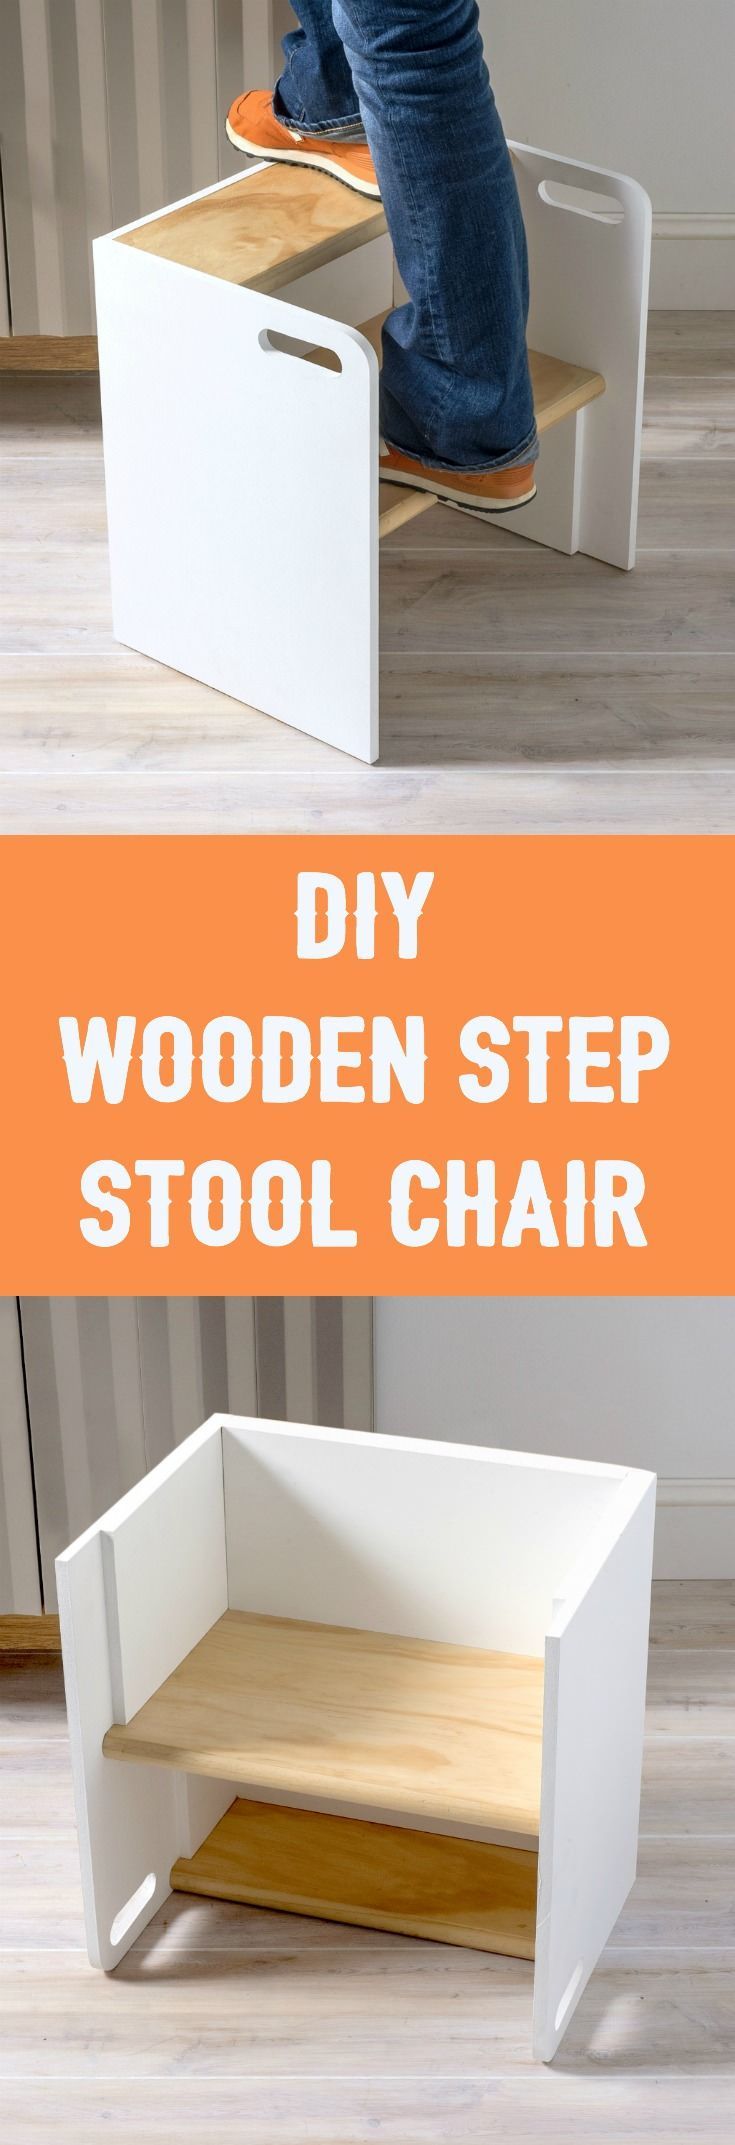 Learn how to build a wooden step stool that turns into a chair if you flip it ov...